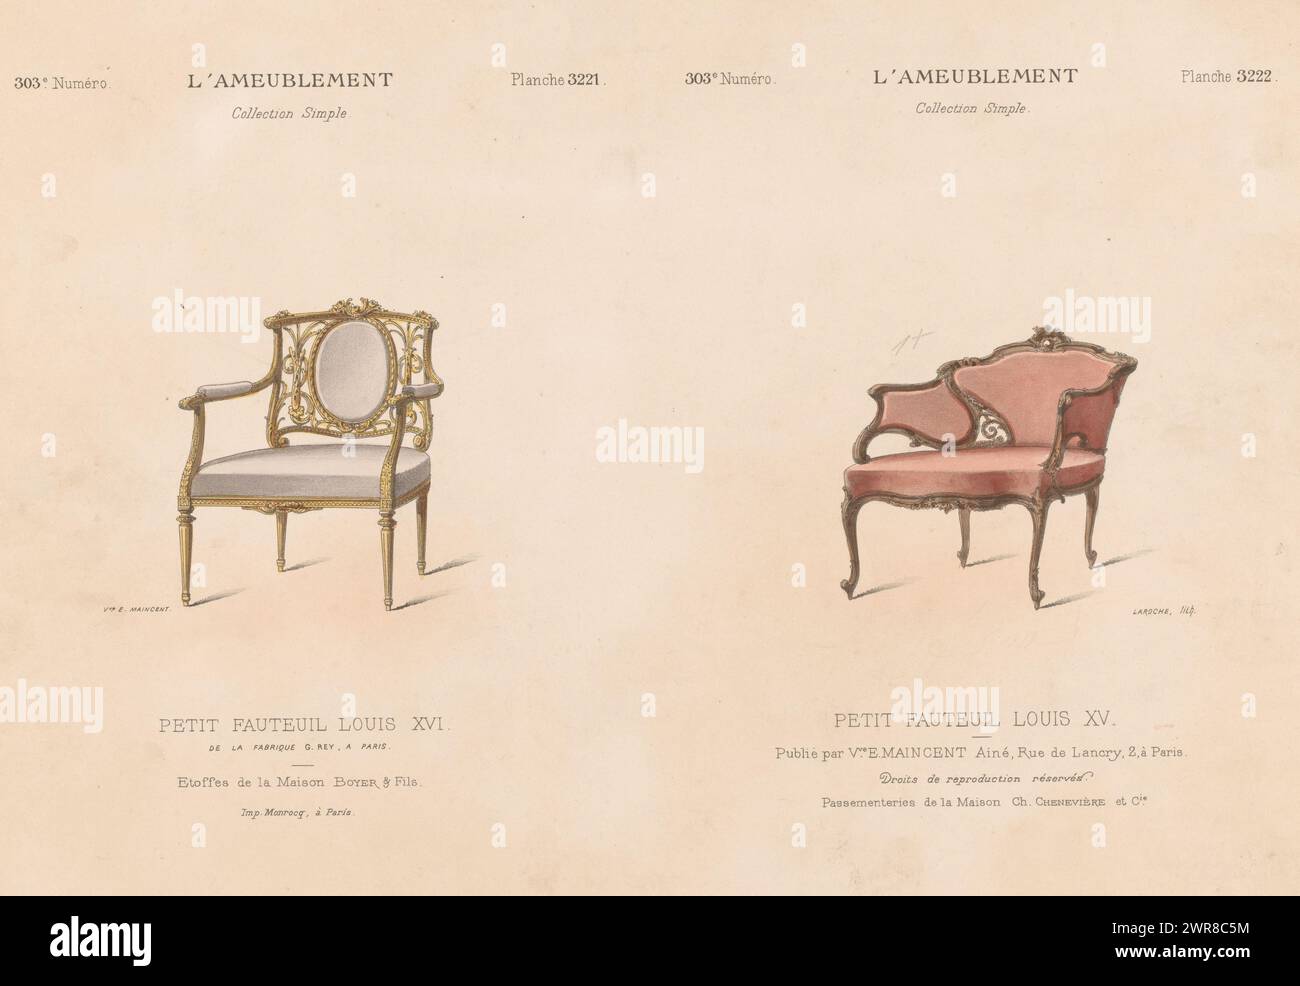 Two armchairs, Petit armchair Louis XVI / Petit armchair Louis XV (title on object), L'ameublement / Collection simple (series title on object), Two armchairs in the styles of Louis Print from 303rd issue (livraison)., print maker: Léon Laroche, printer: Monrocq, publisher: weduwe Eugène Maincent, Paris, 1895, paper, height 276 mm × width 360 mm, print Stock Photo